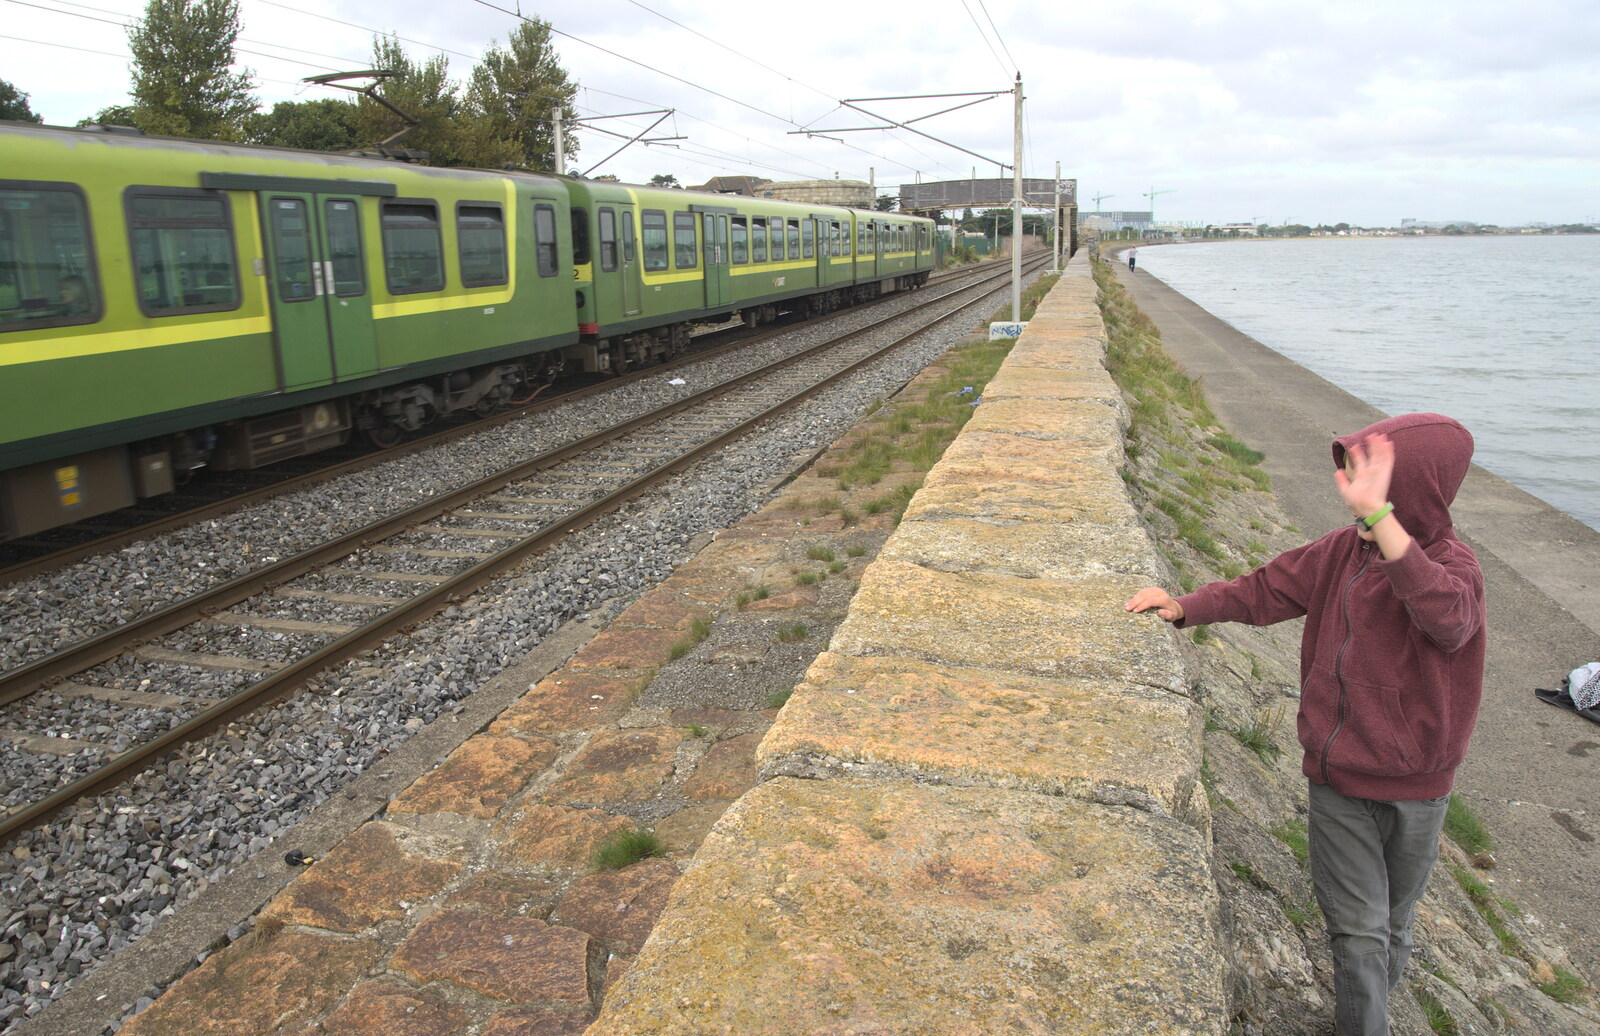 Fred waves to a passing DART train from Sion Hill and Blackrock for the Day, Dublin, Ireland - 17th September 2016